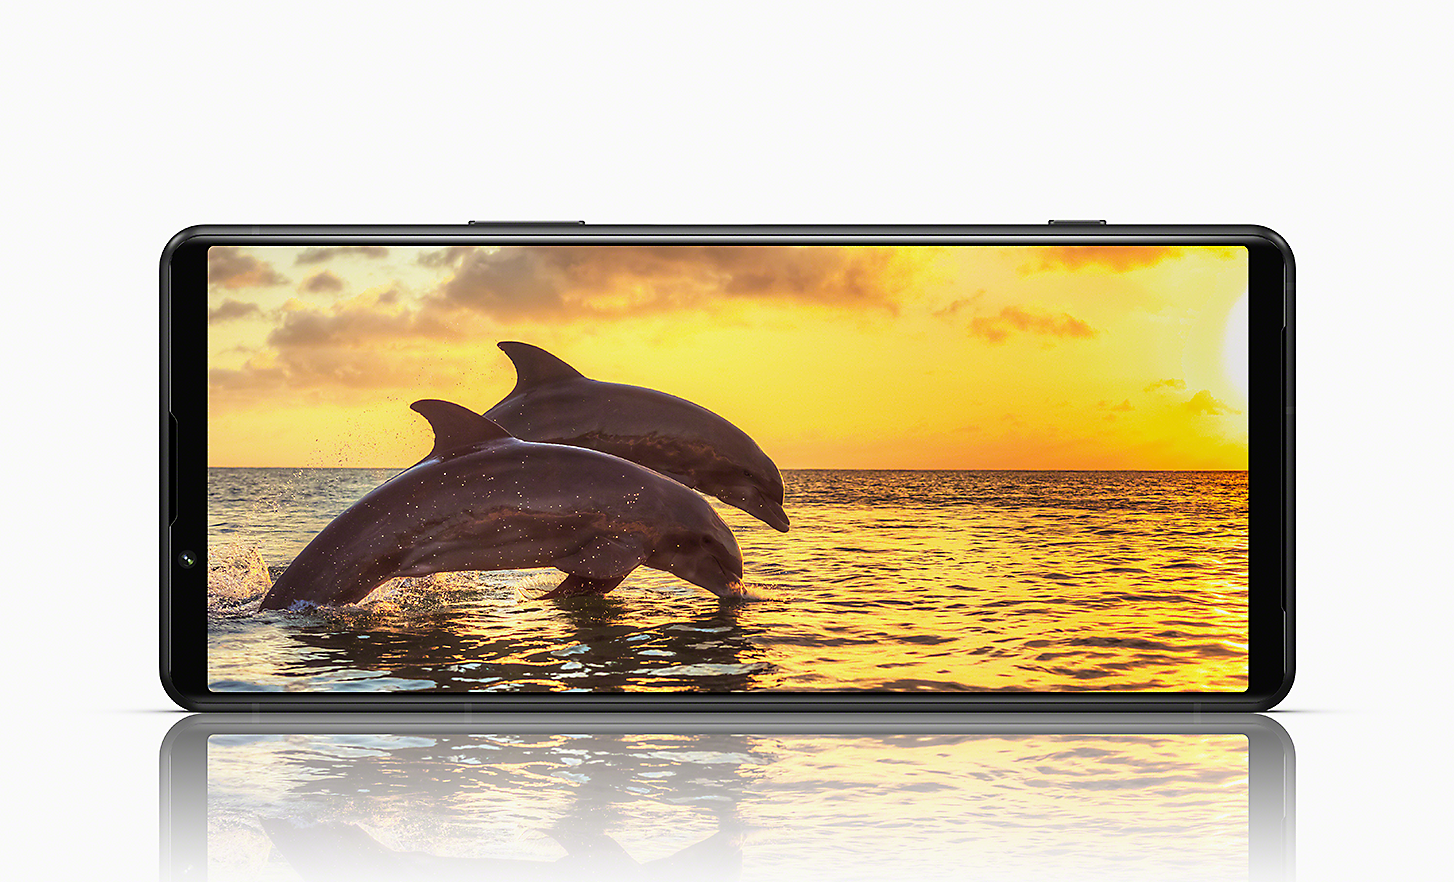 Xperia 5 IV in landscape position displaying a sunset image of dolphins leaping out of the sea